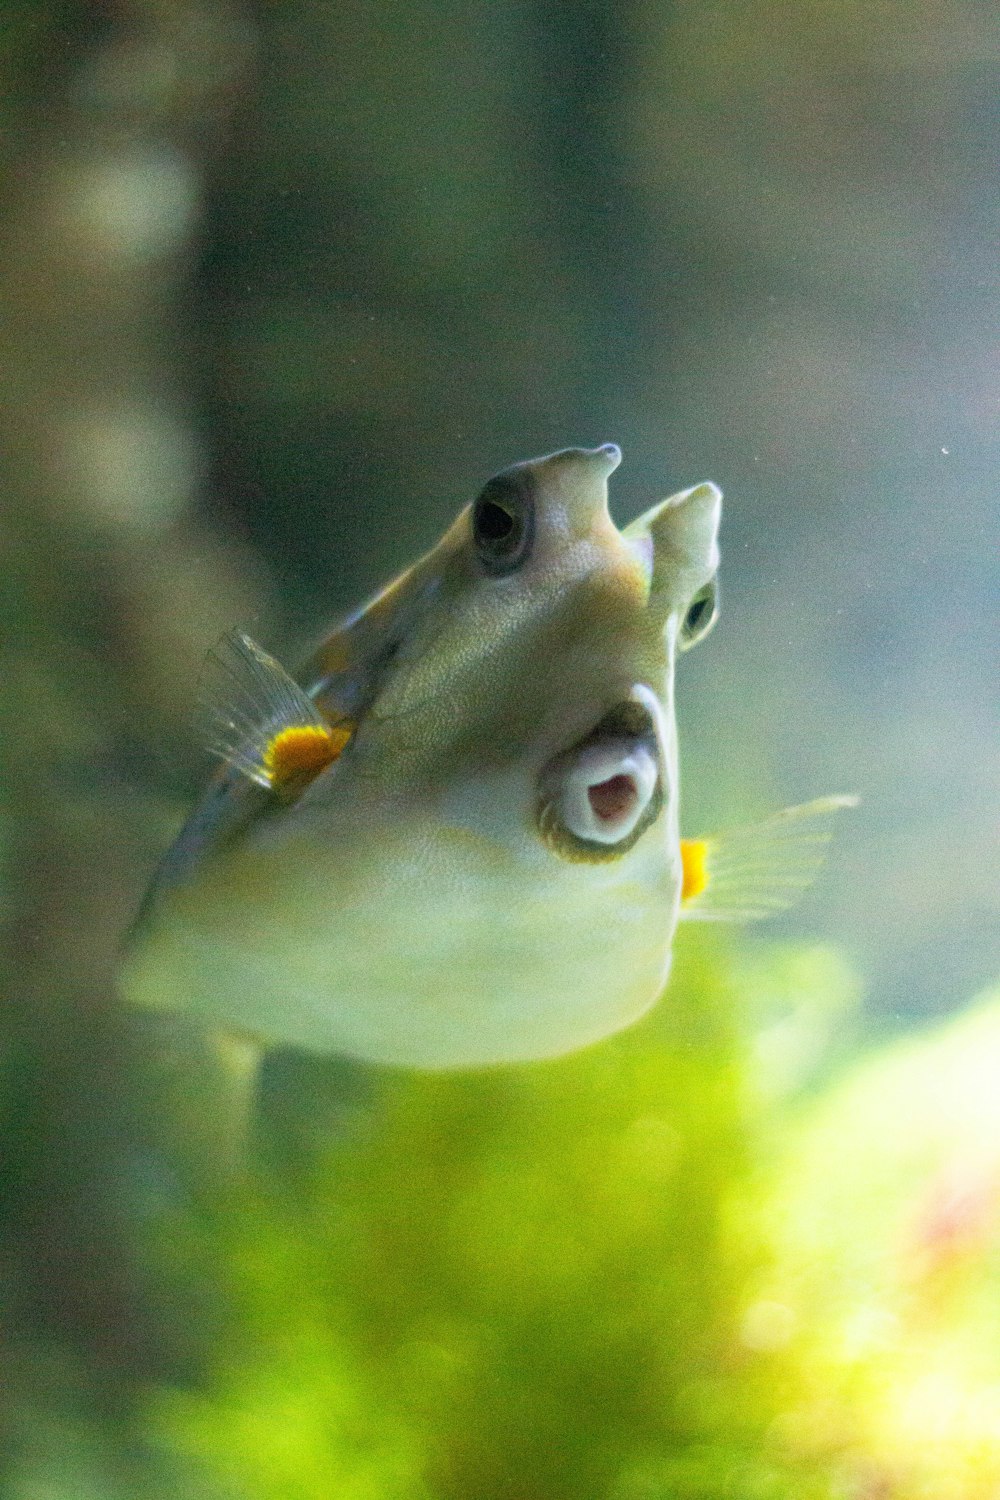 a close up of a fish with its mouth open